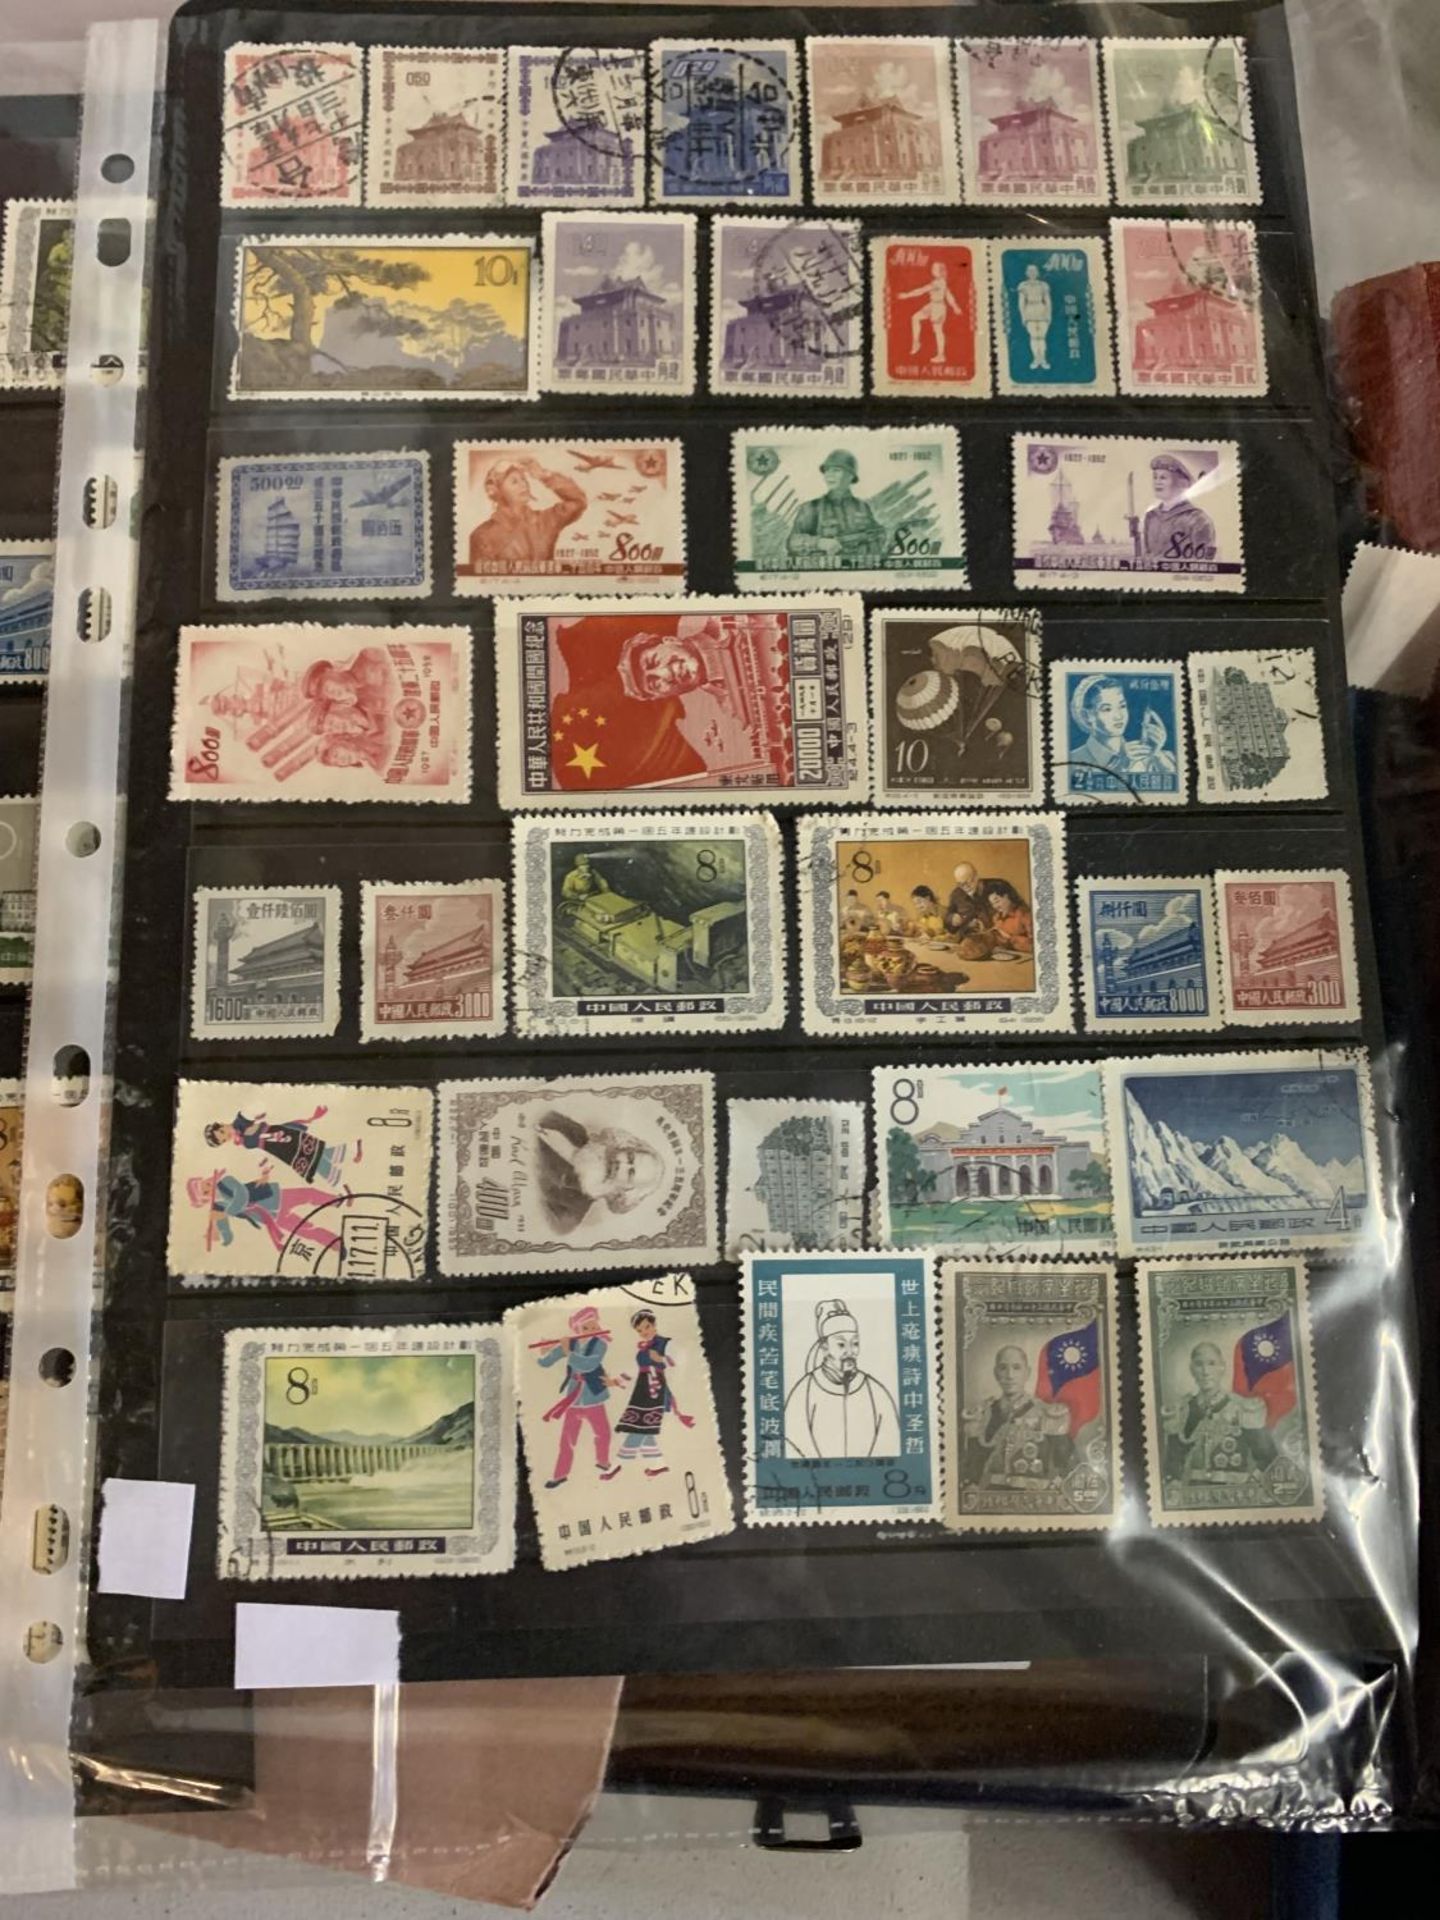 A COLLECTIONS OF STAMPS - Image 2 of 5